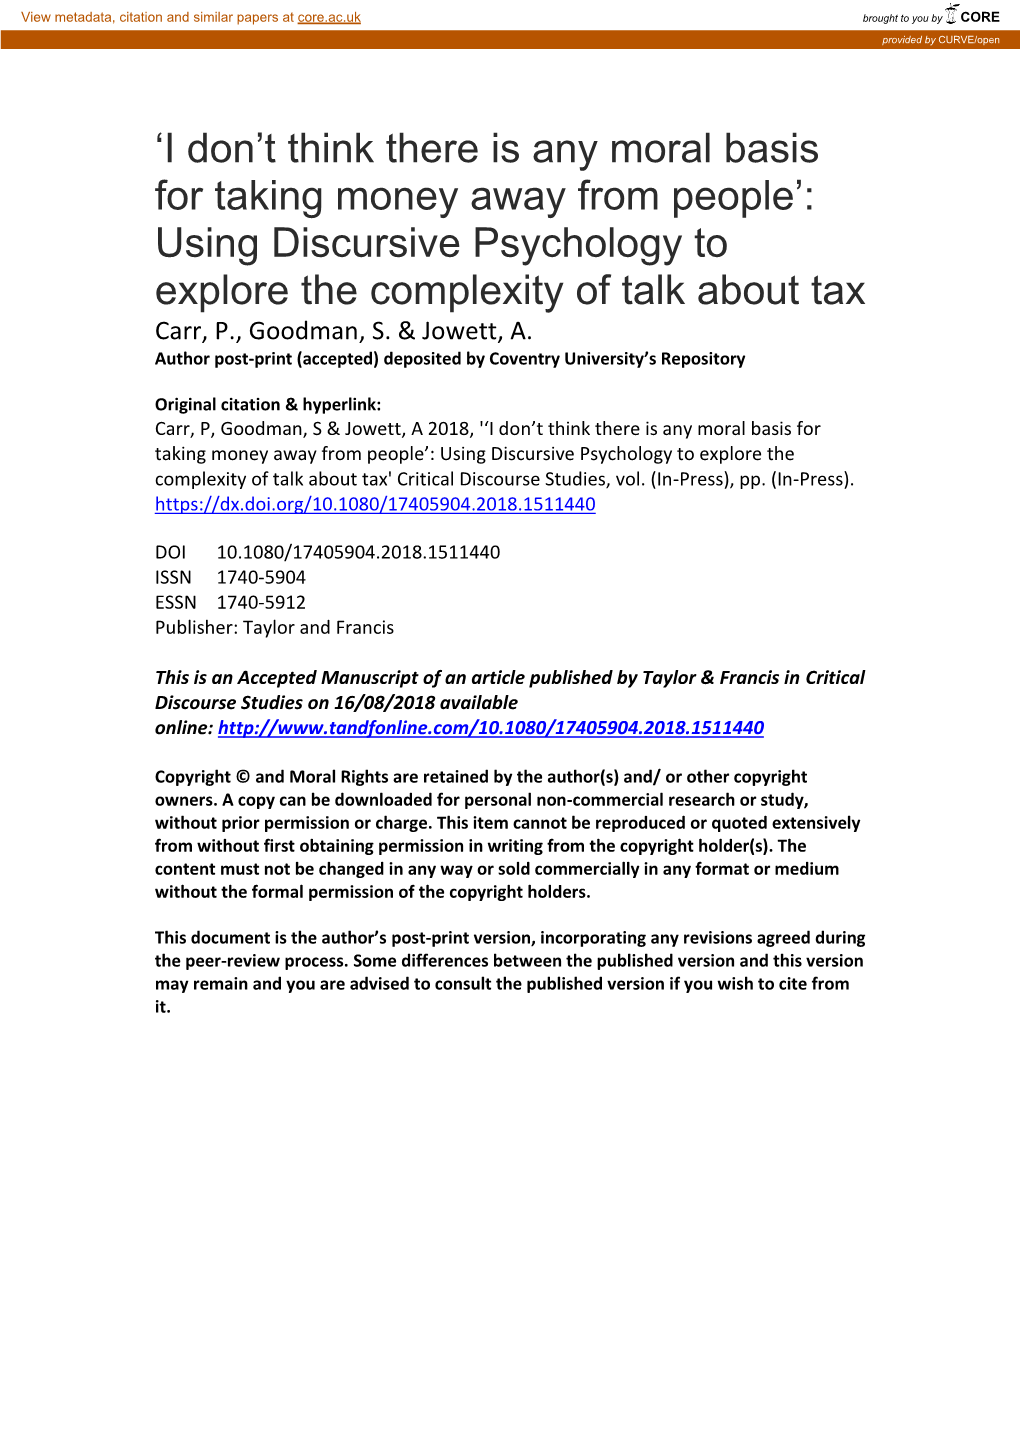 T Think There Is Any Moral Basis for Taking Money Away from People’: Using Discursive Psychology to Explore the Complexity of Talk About Tax Carr, P., Goodman, S